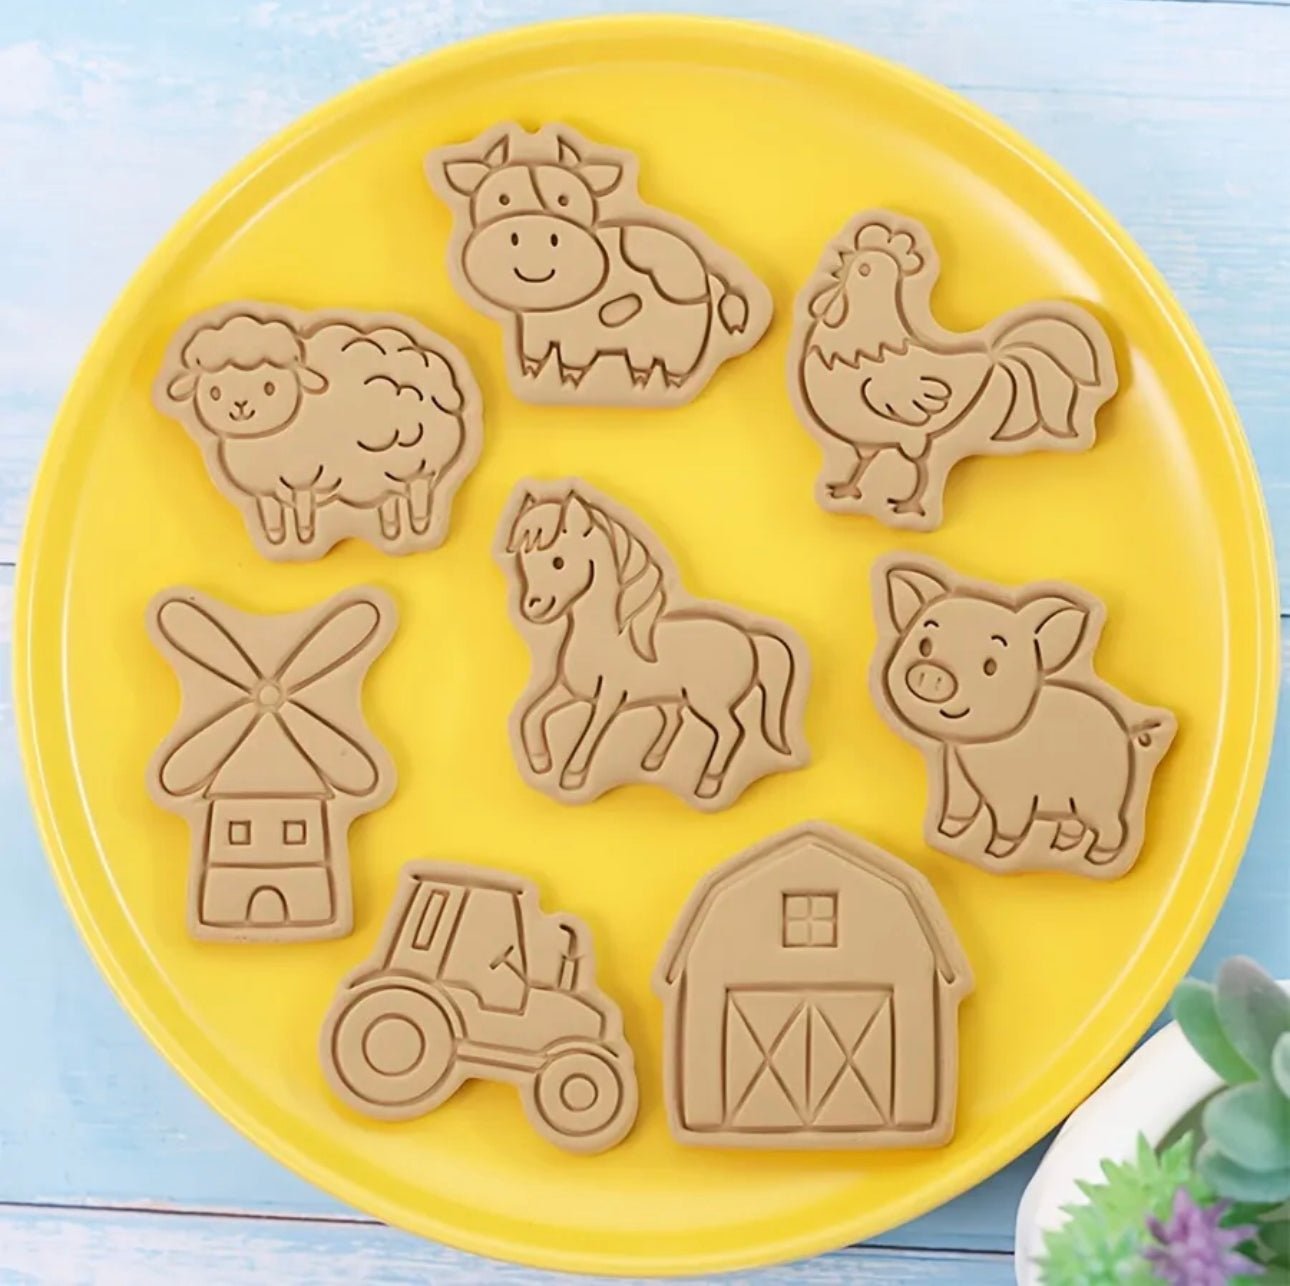 8pcs Plastic Cartoon Biscuit Cutter Stampers Emboss, 3D Cartoon Fun Biscuits Mould Set, For DIY Baking Cake Fondant Pastry Bakeware Decoration